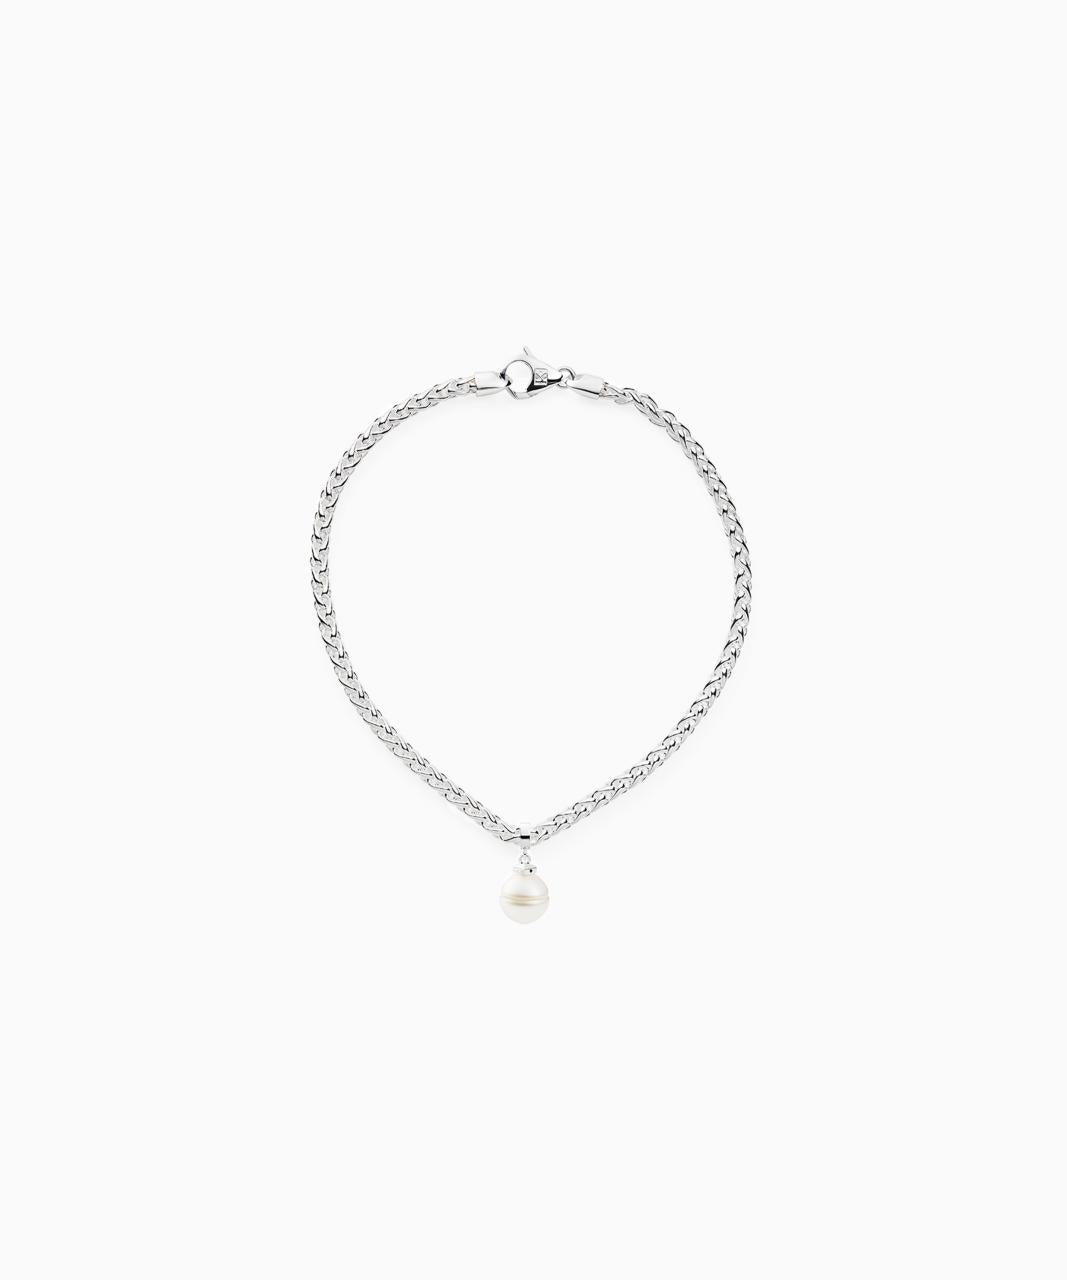 Kailis – Geometric Sliding Pearl Necklace, Sterling Silver